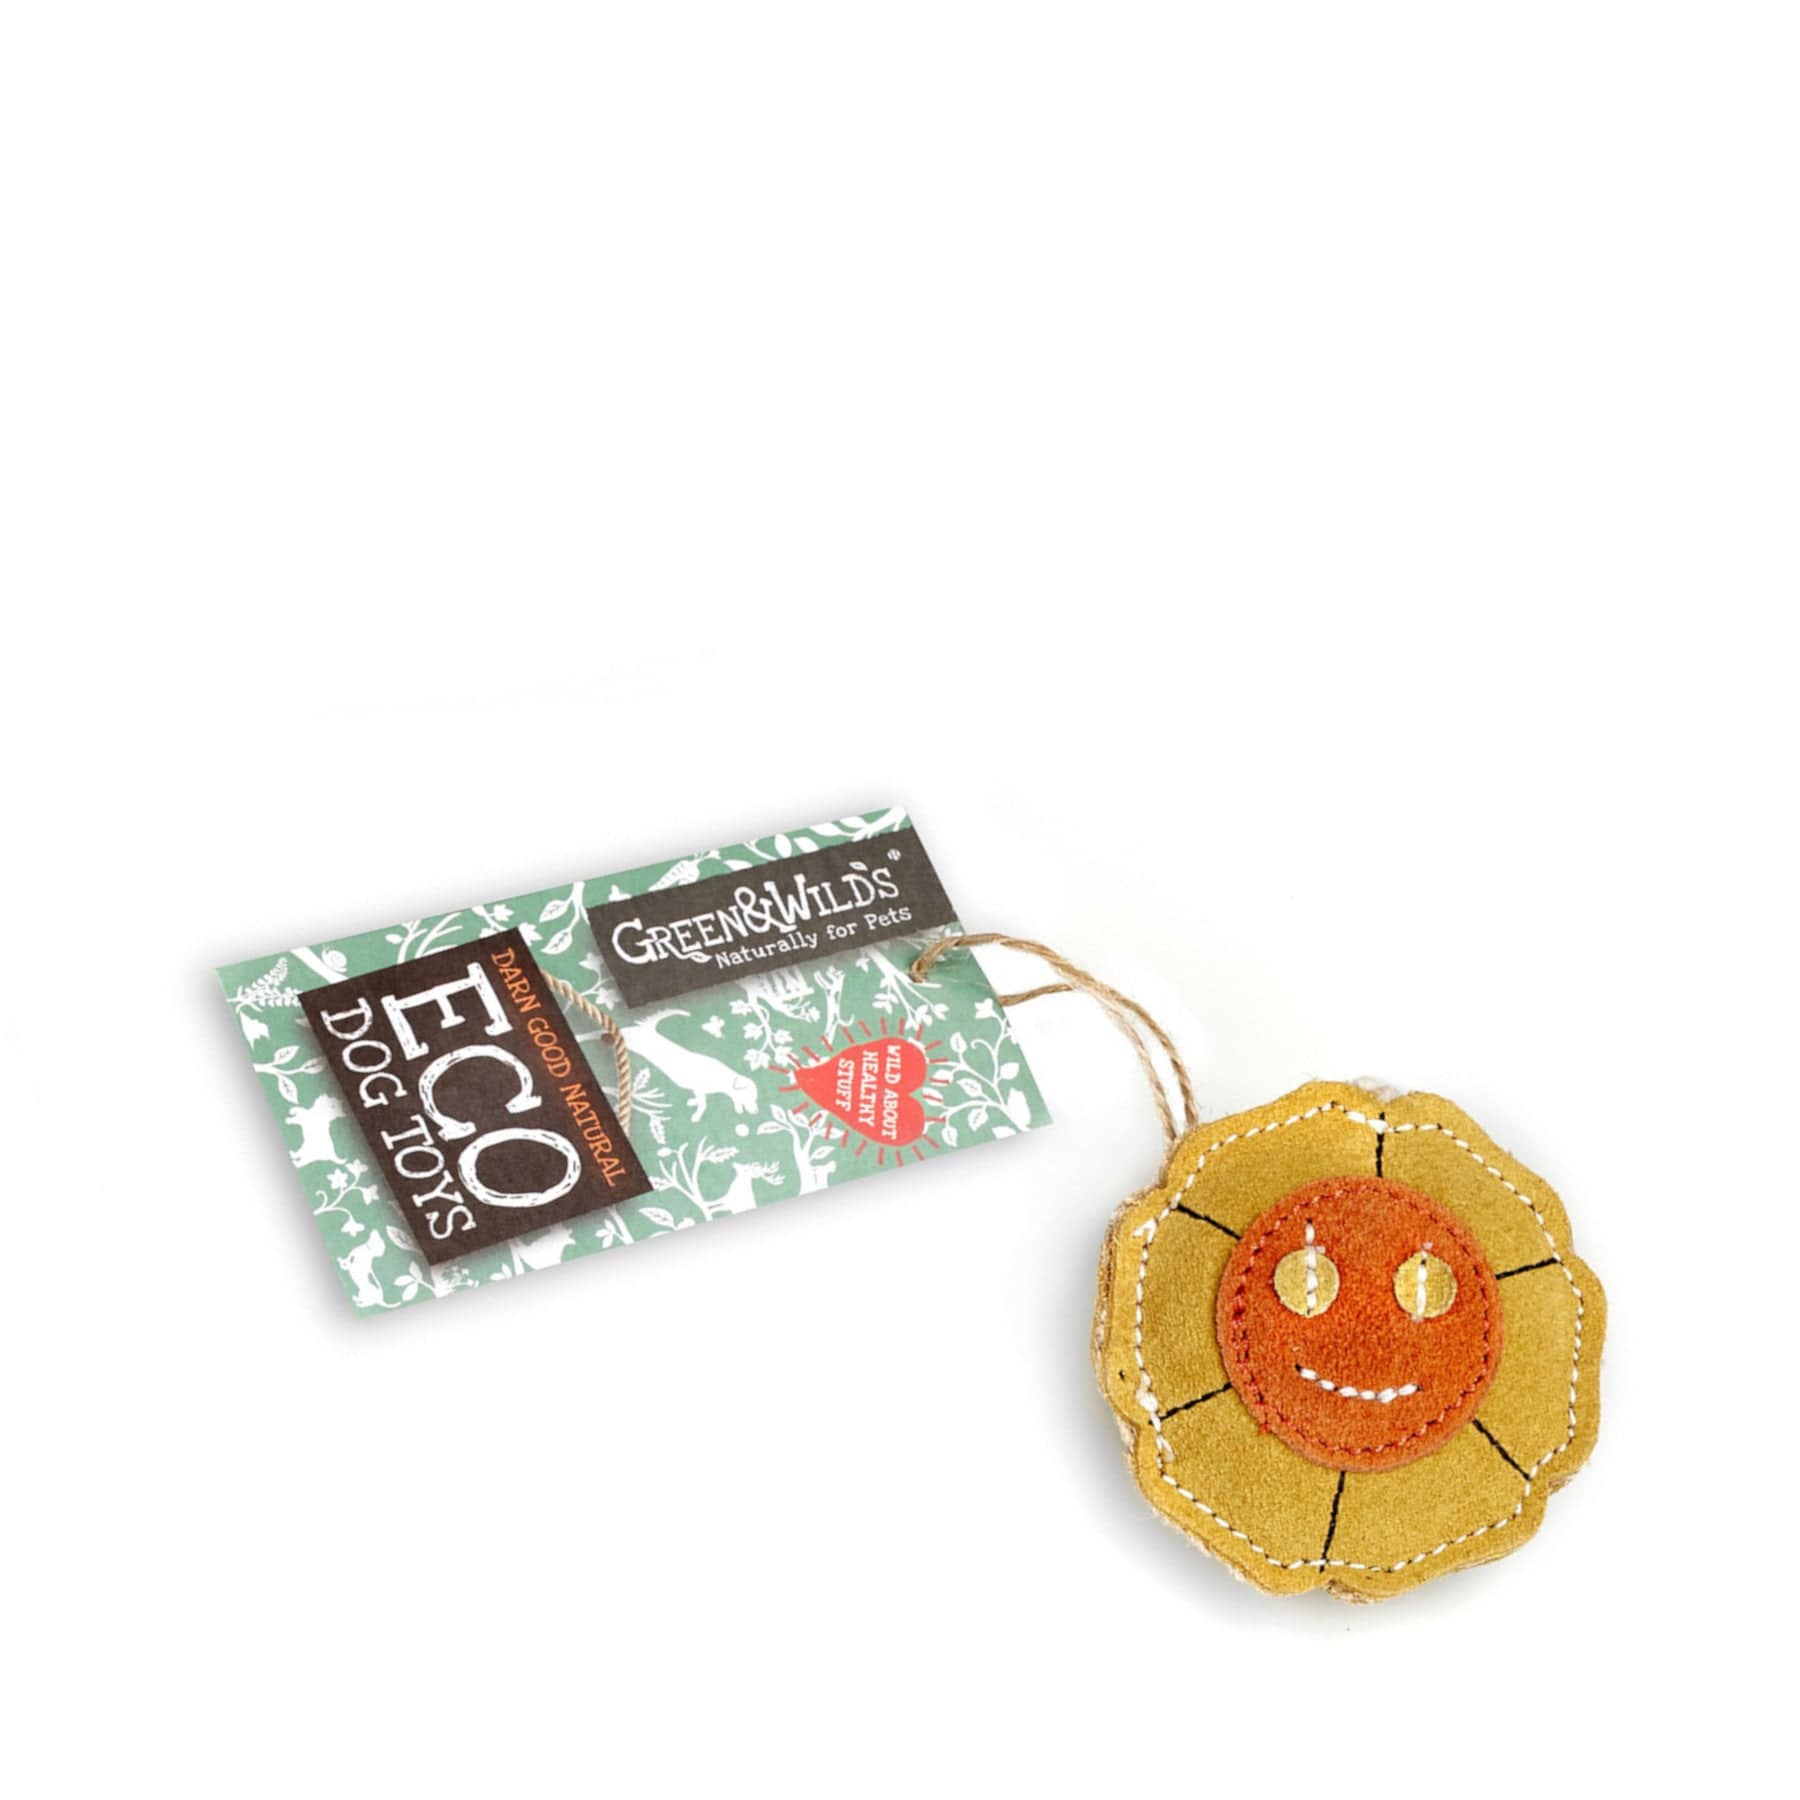 Eco-friendly dog toy with a smiling flower design and Green & Wilds packaging on a white background.